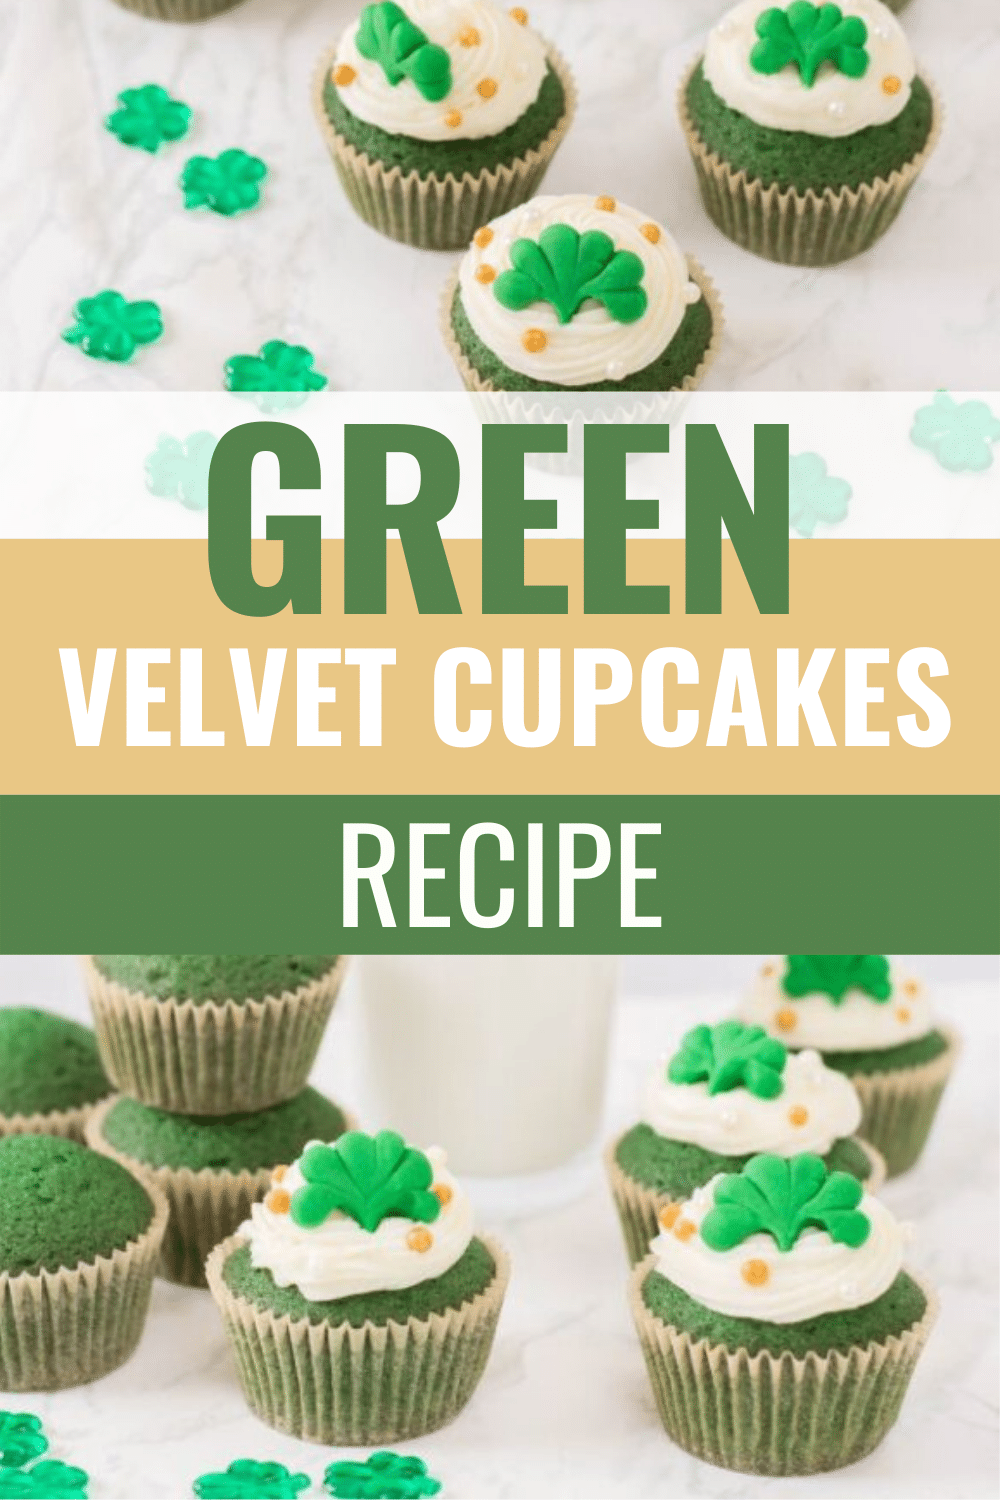 This Homemade Green Velvet Cupcakes Recipe is about to make all your cupcake dreams come true. Such a fun way to celebrate St. Patrick's Day! #stpatricksday #cupcakes #greenvelvet #recipe via @wondermomwannab